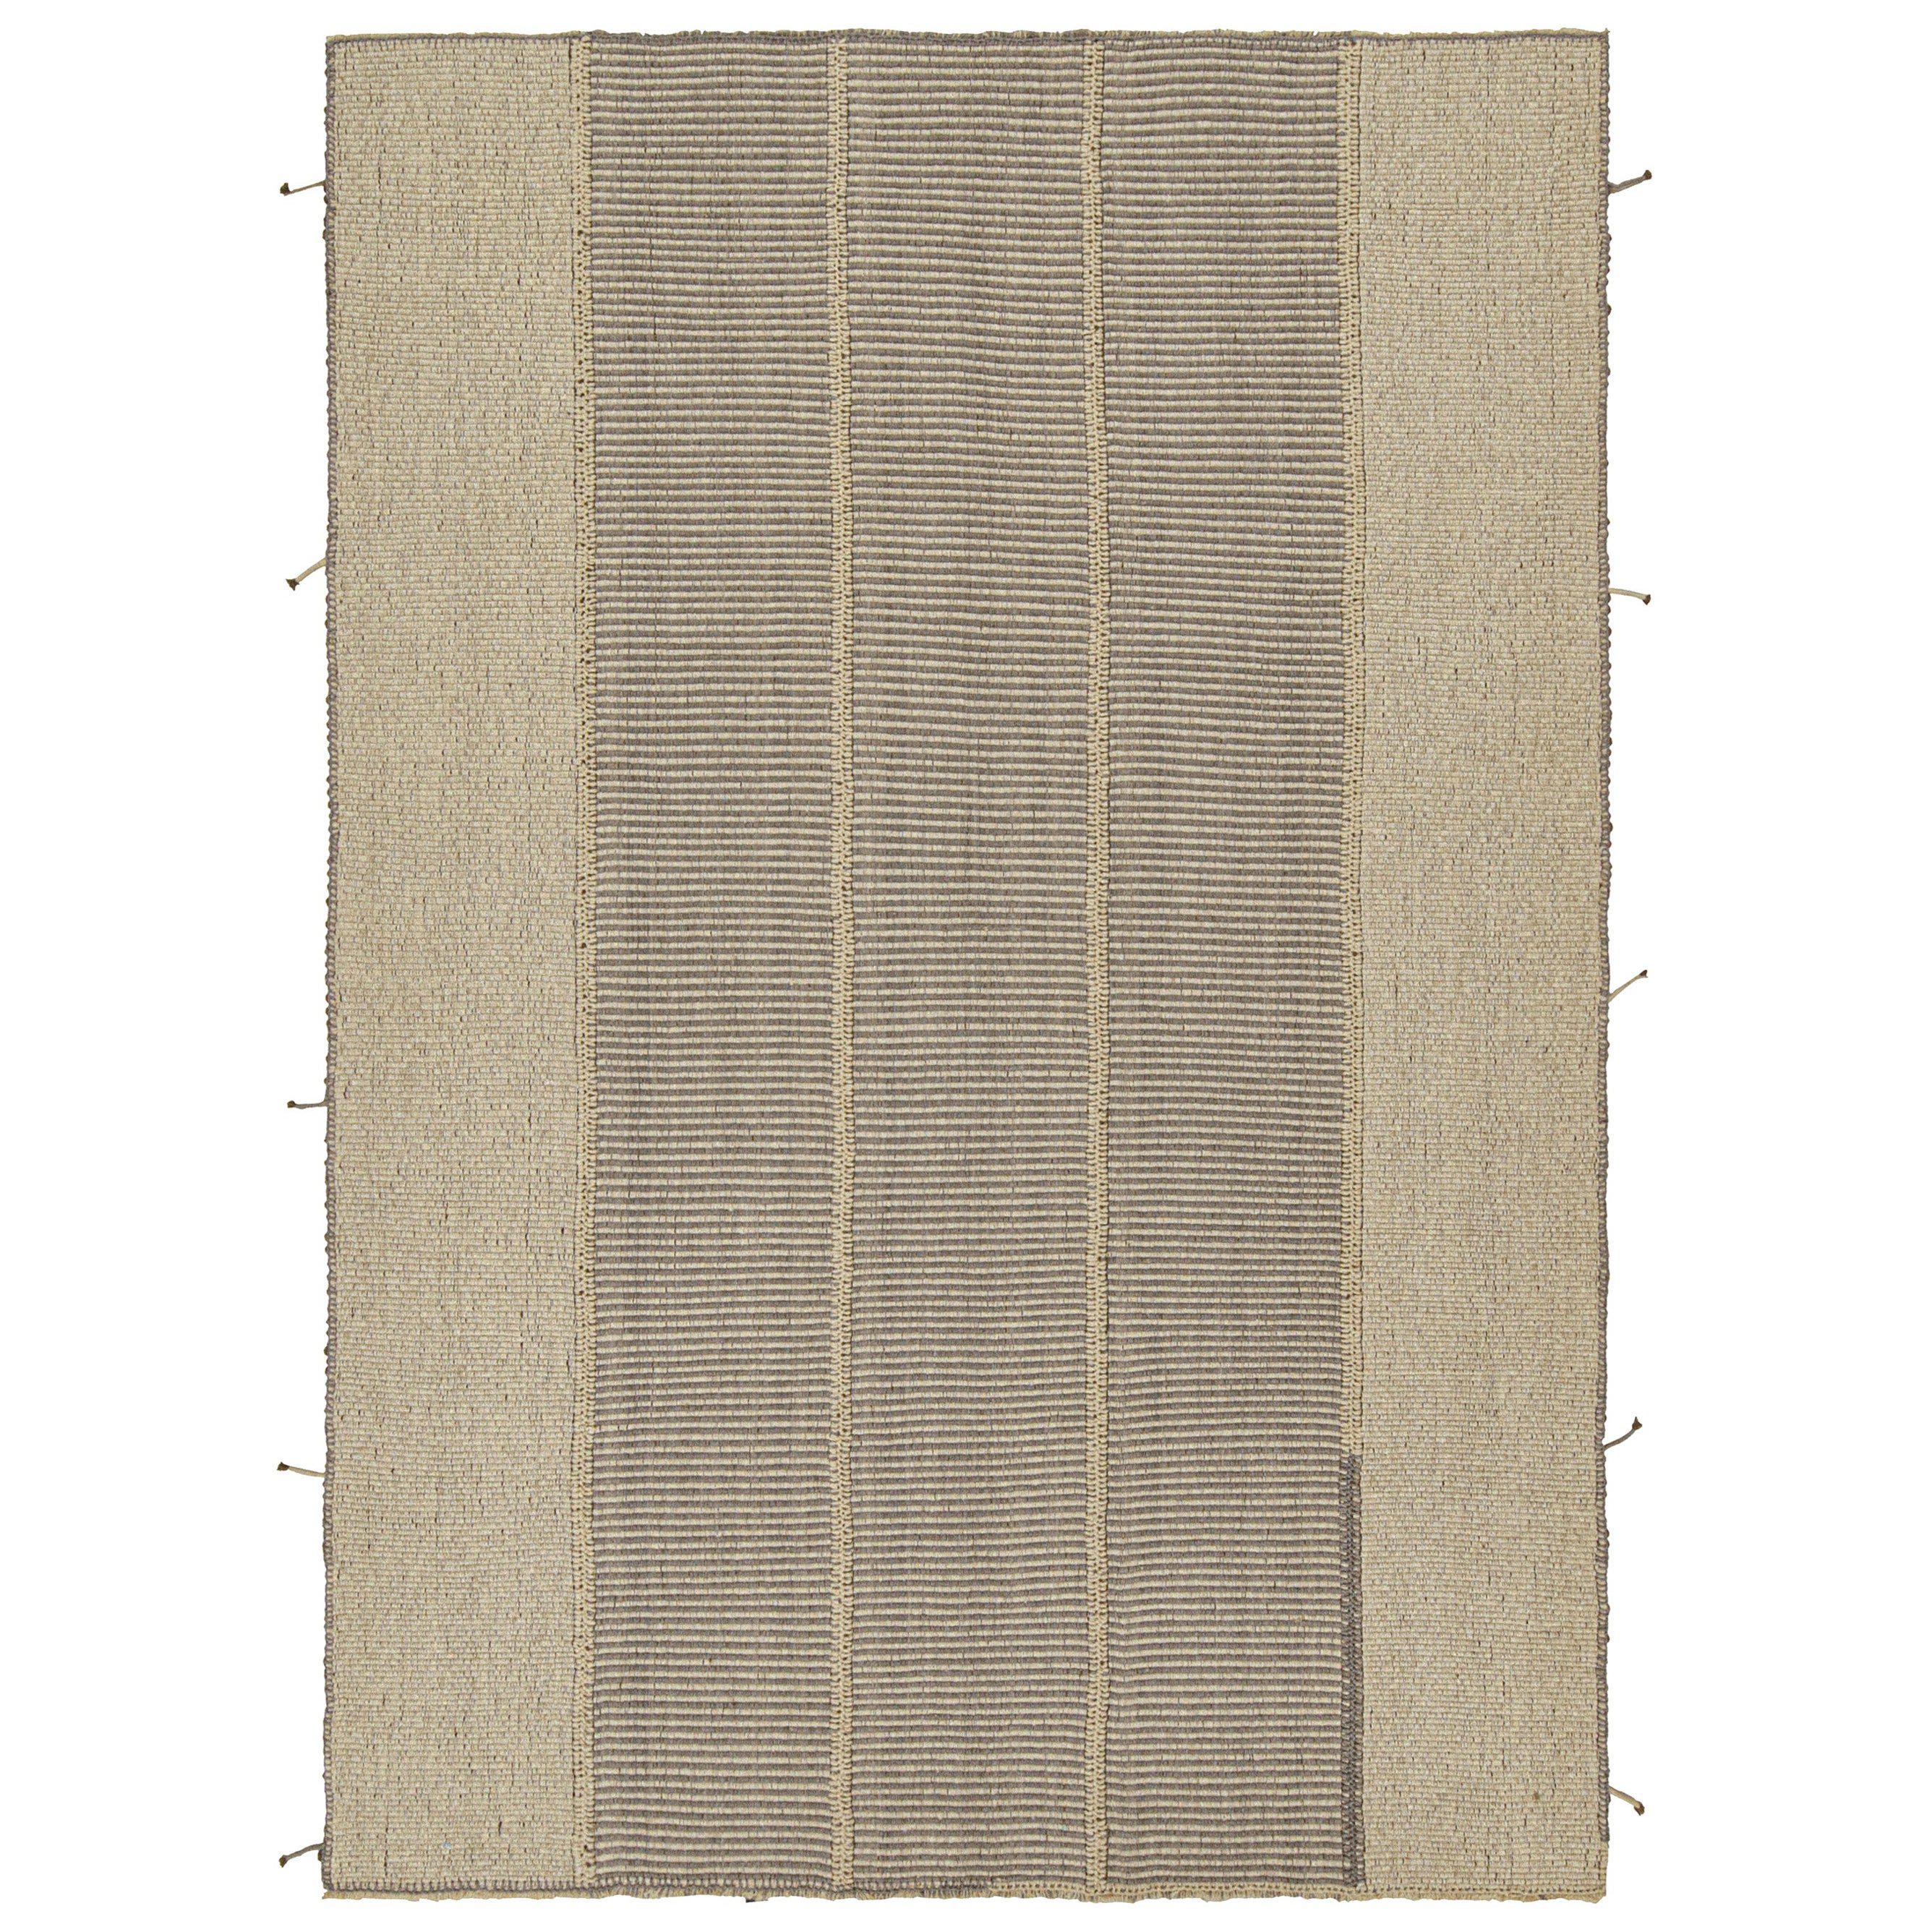 Rug & Kilim’s Contemporary Custom Kilim Design in Beige-Brown and Gray For Sale